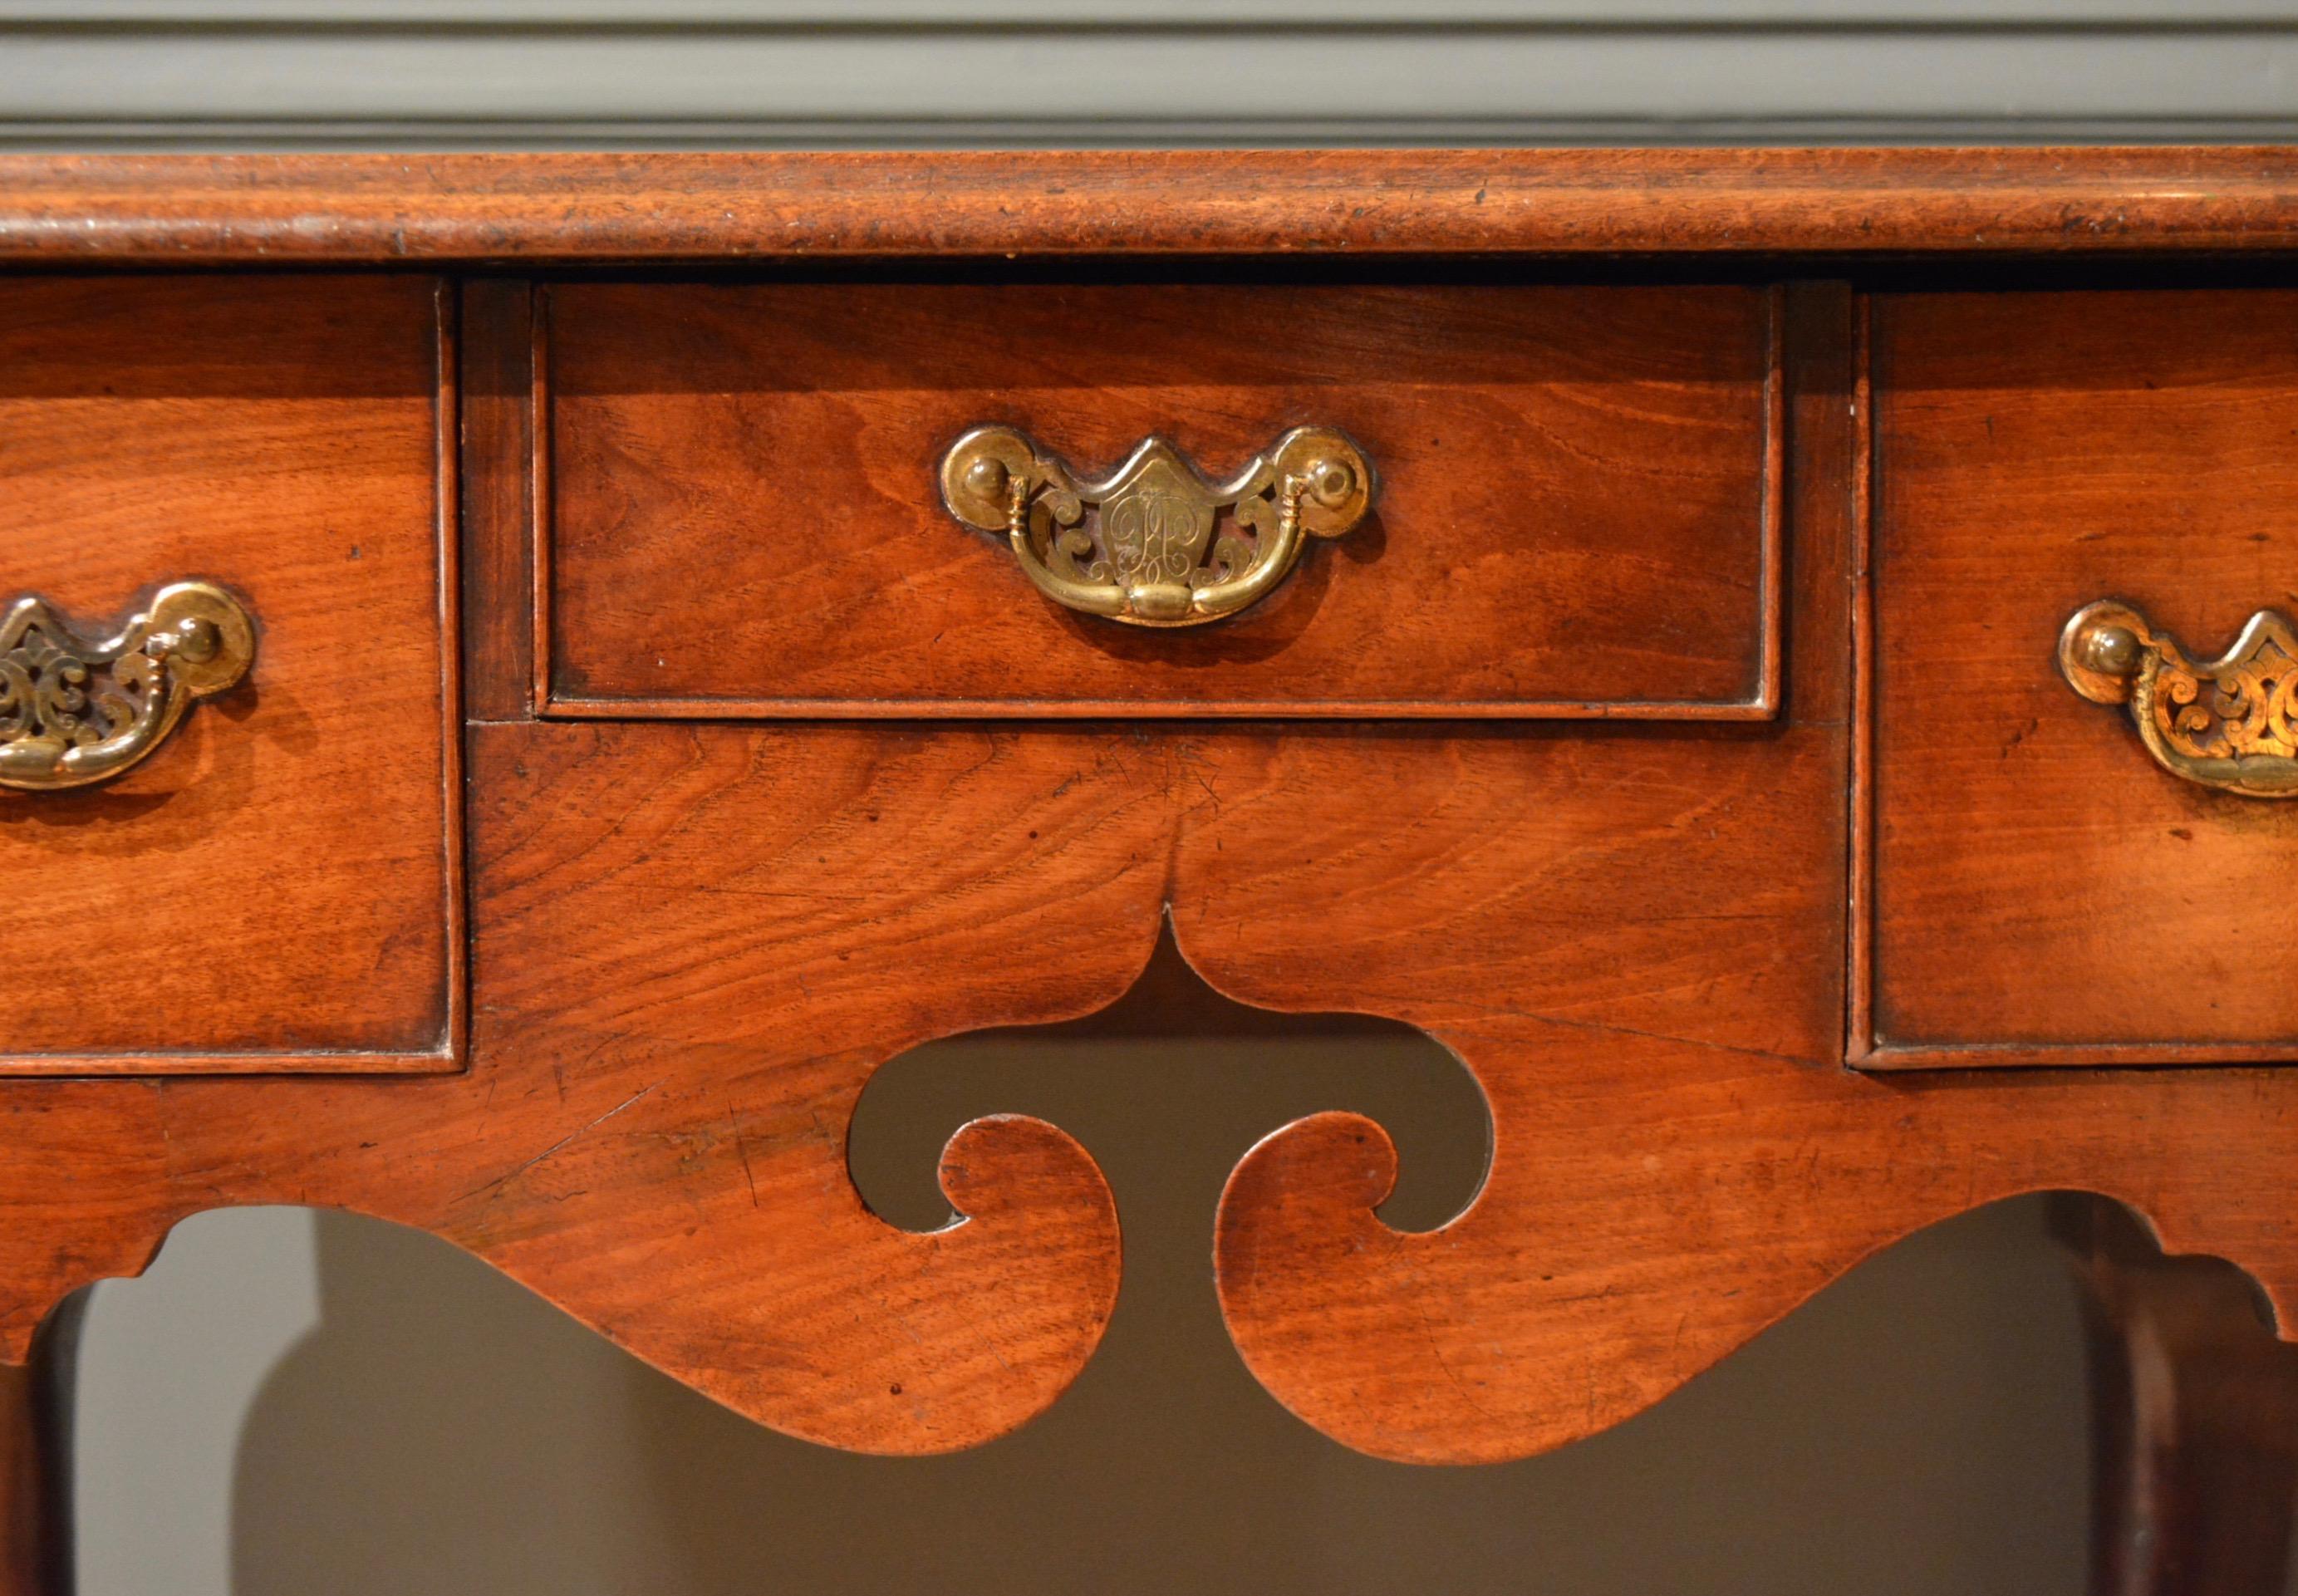 A George II mahogany lowboy standing on finely shaped cabriole legs finished with faceted pad feet (often thought to indicate an Irish origin) the three drawers retaining their original engraved handles, the central one containing a cipher.